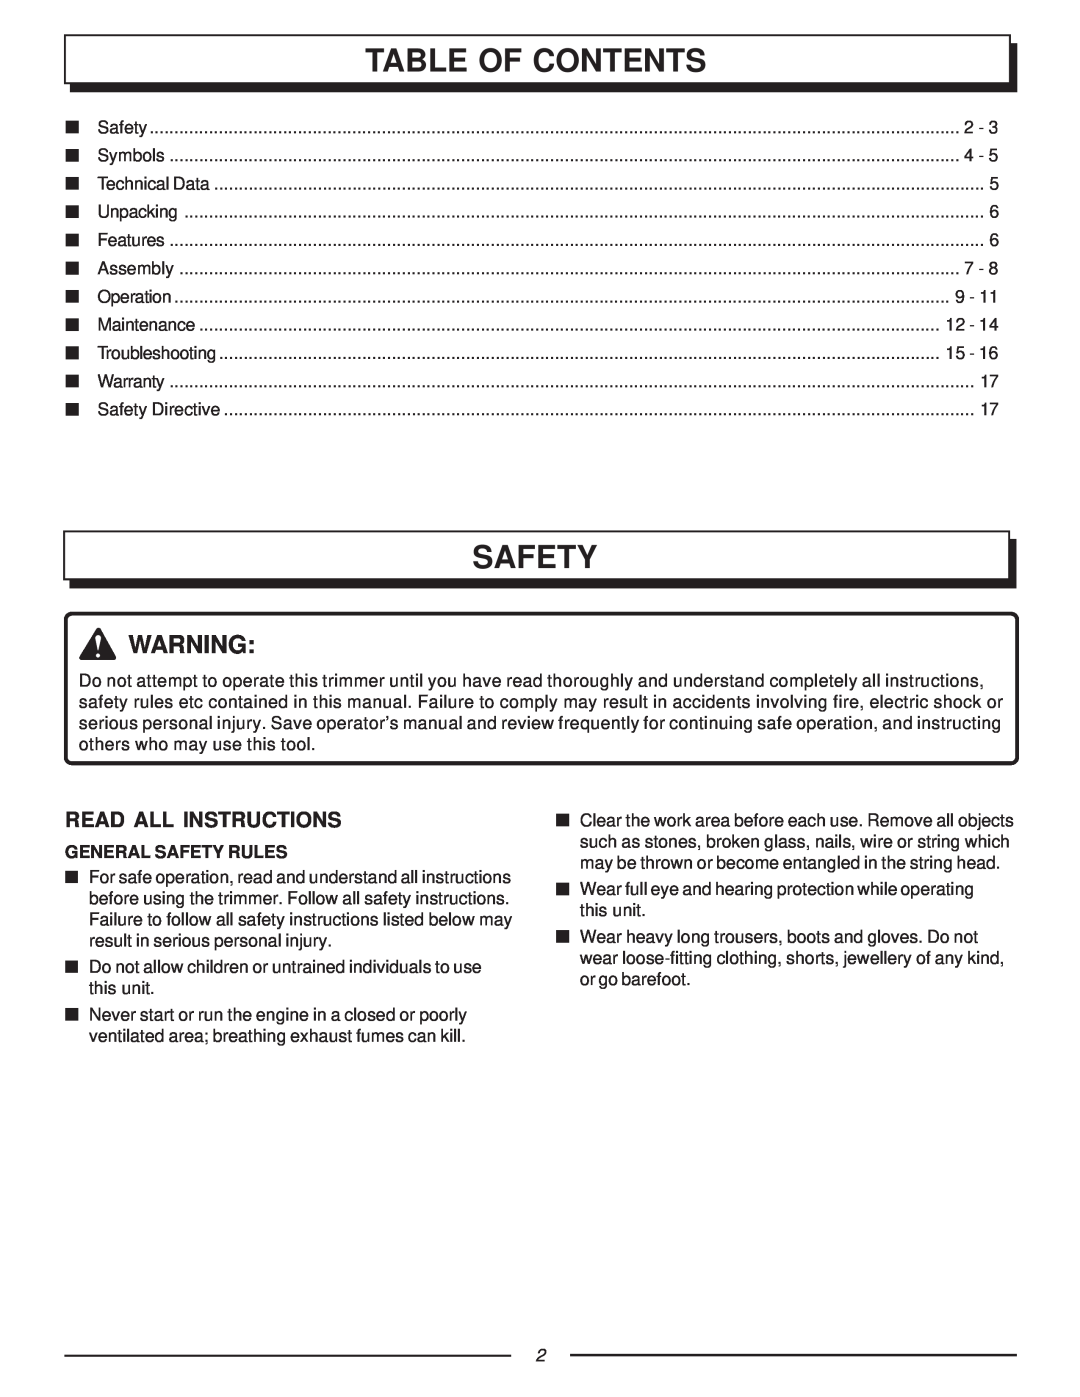 Homelite F2020, UT70121 manual Table Of Contents, Read All Instructions, General Safety Rules 